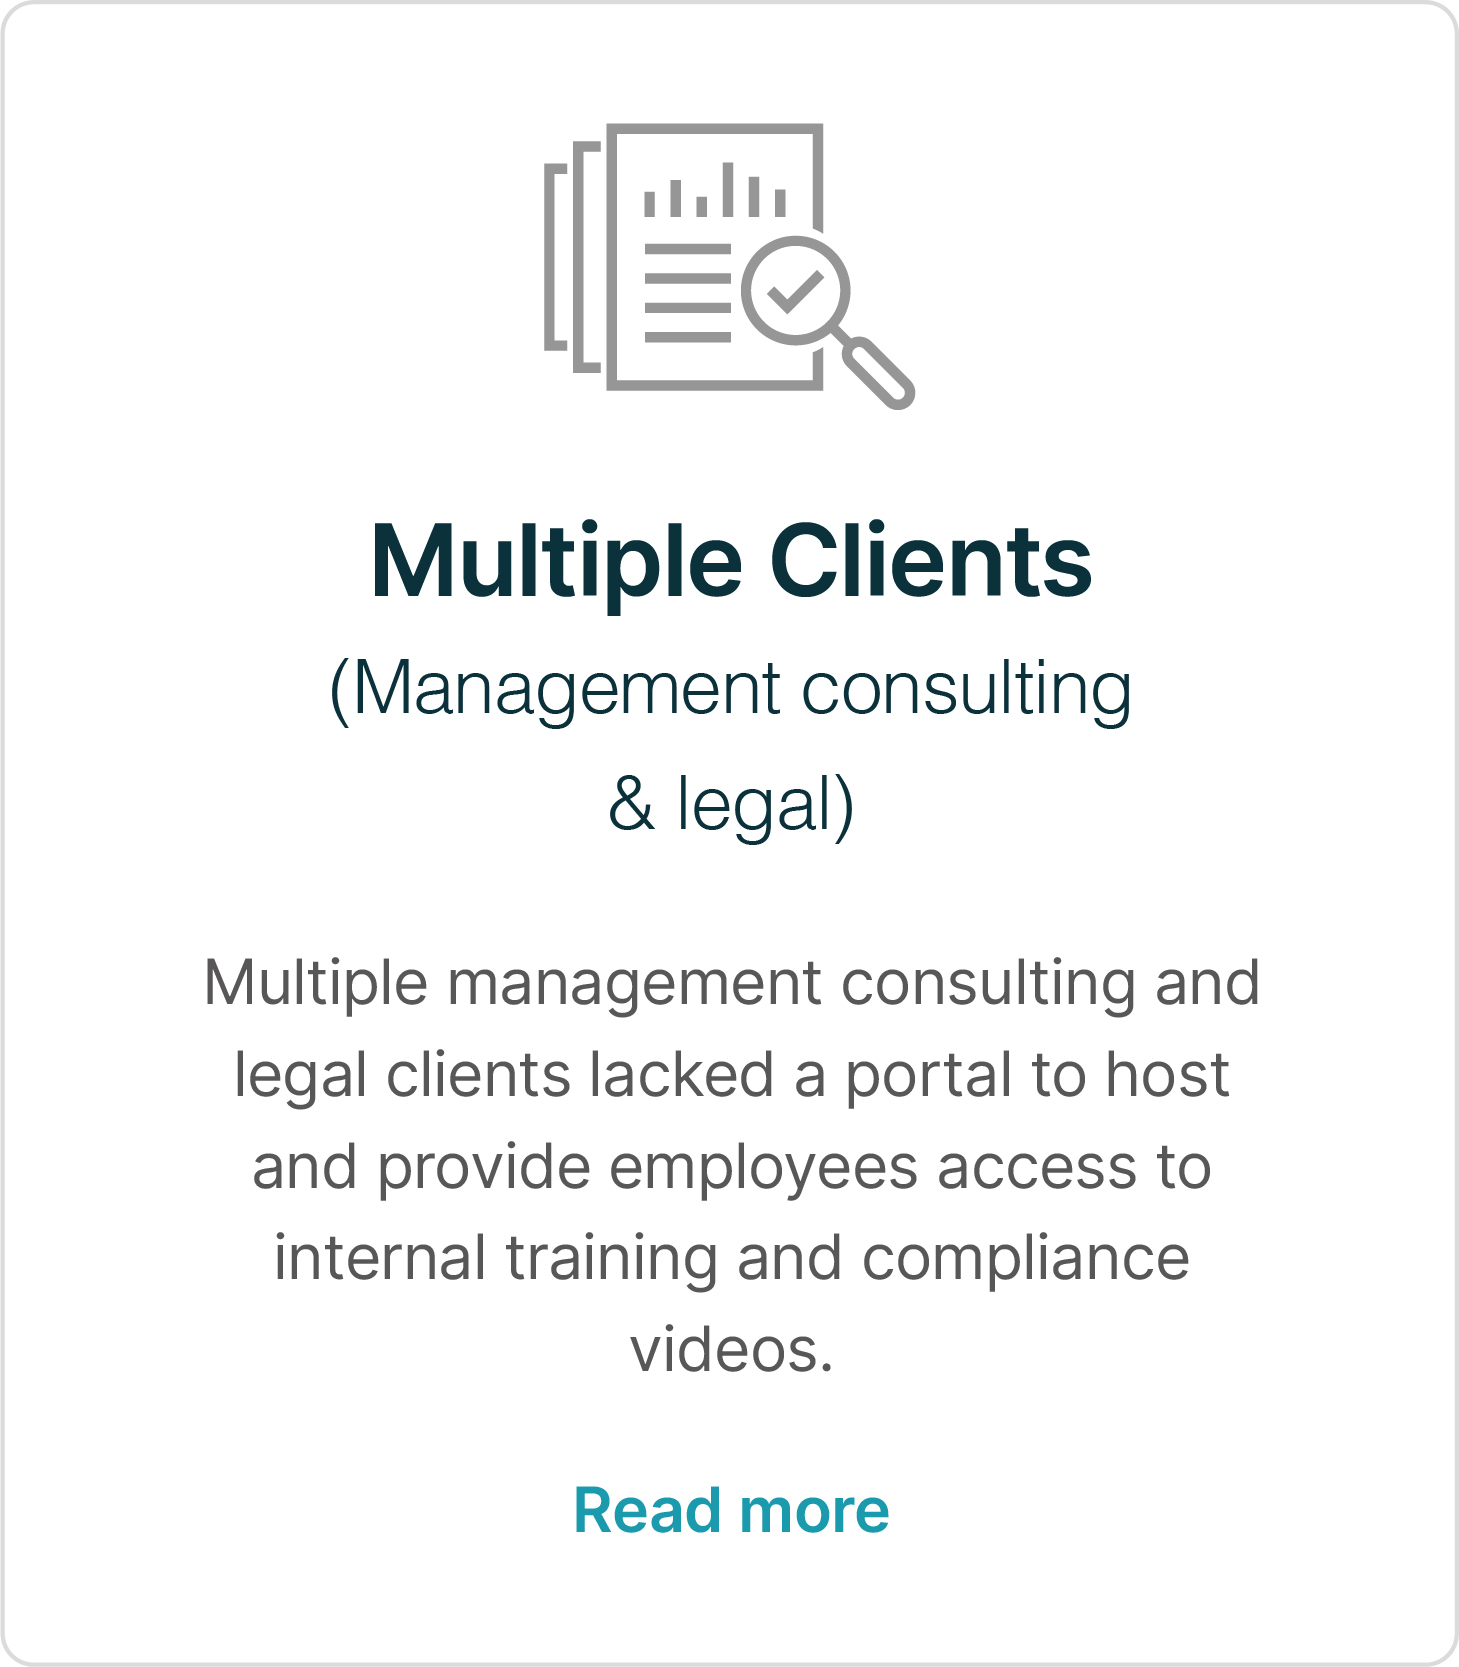 MultipleClients-ManagementConsulting-Legal